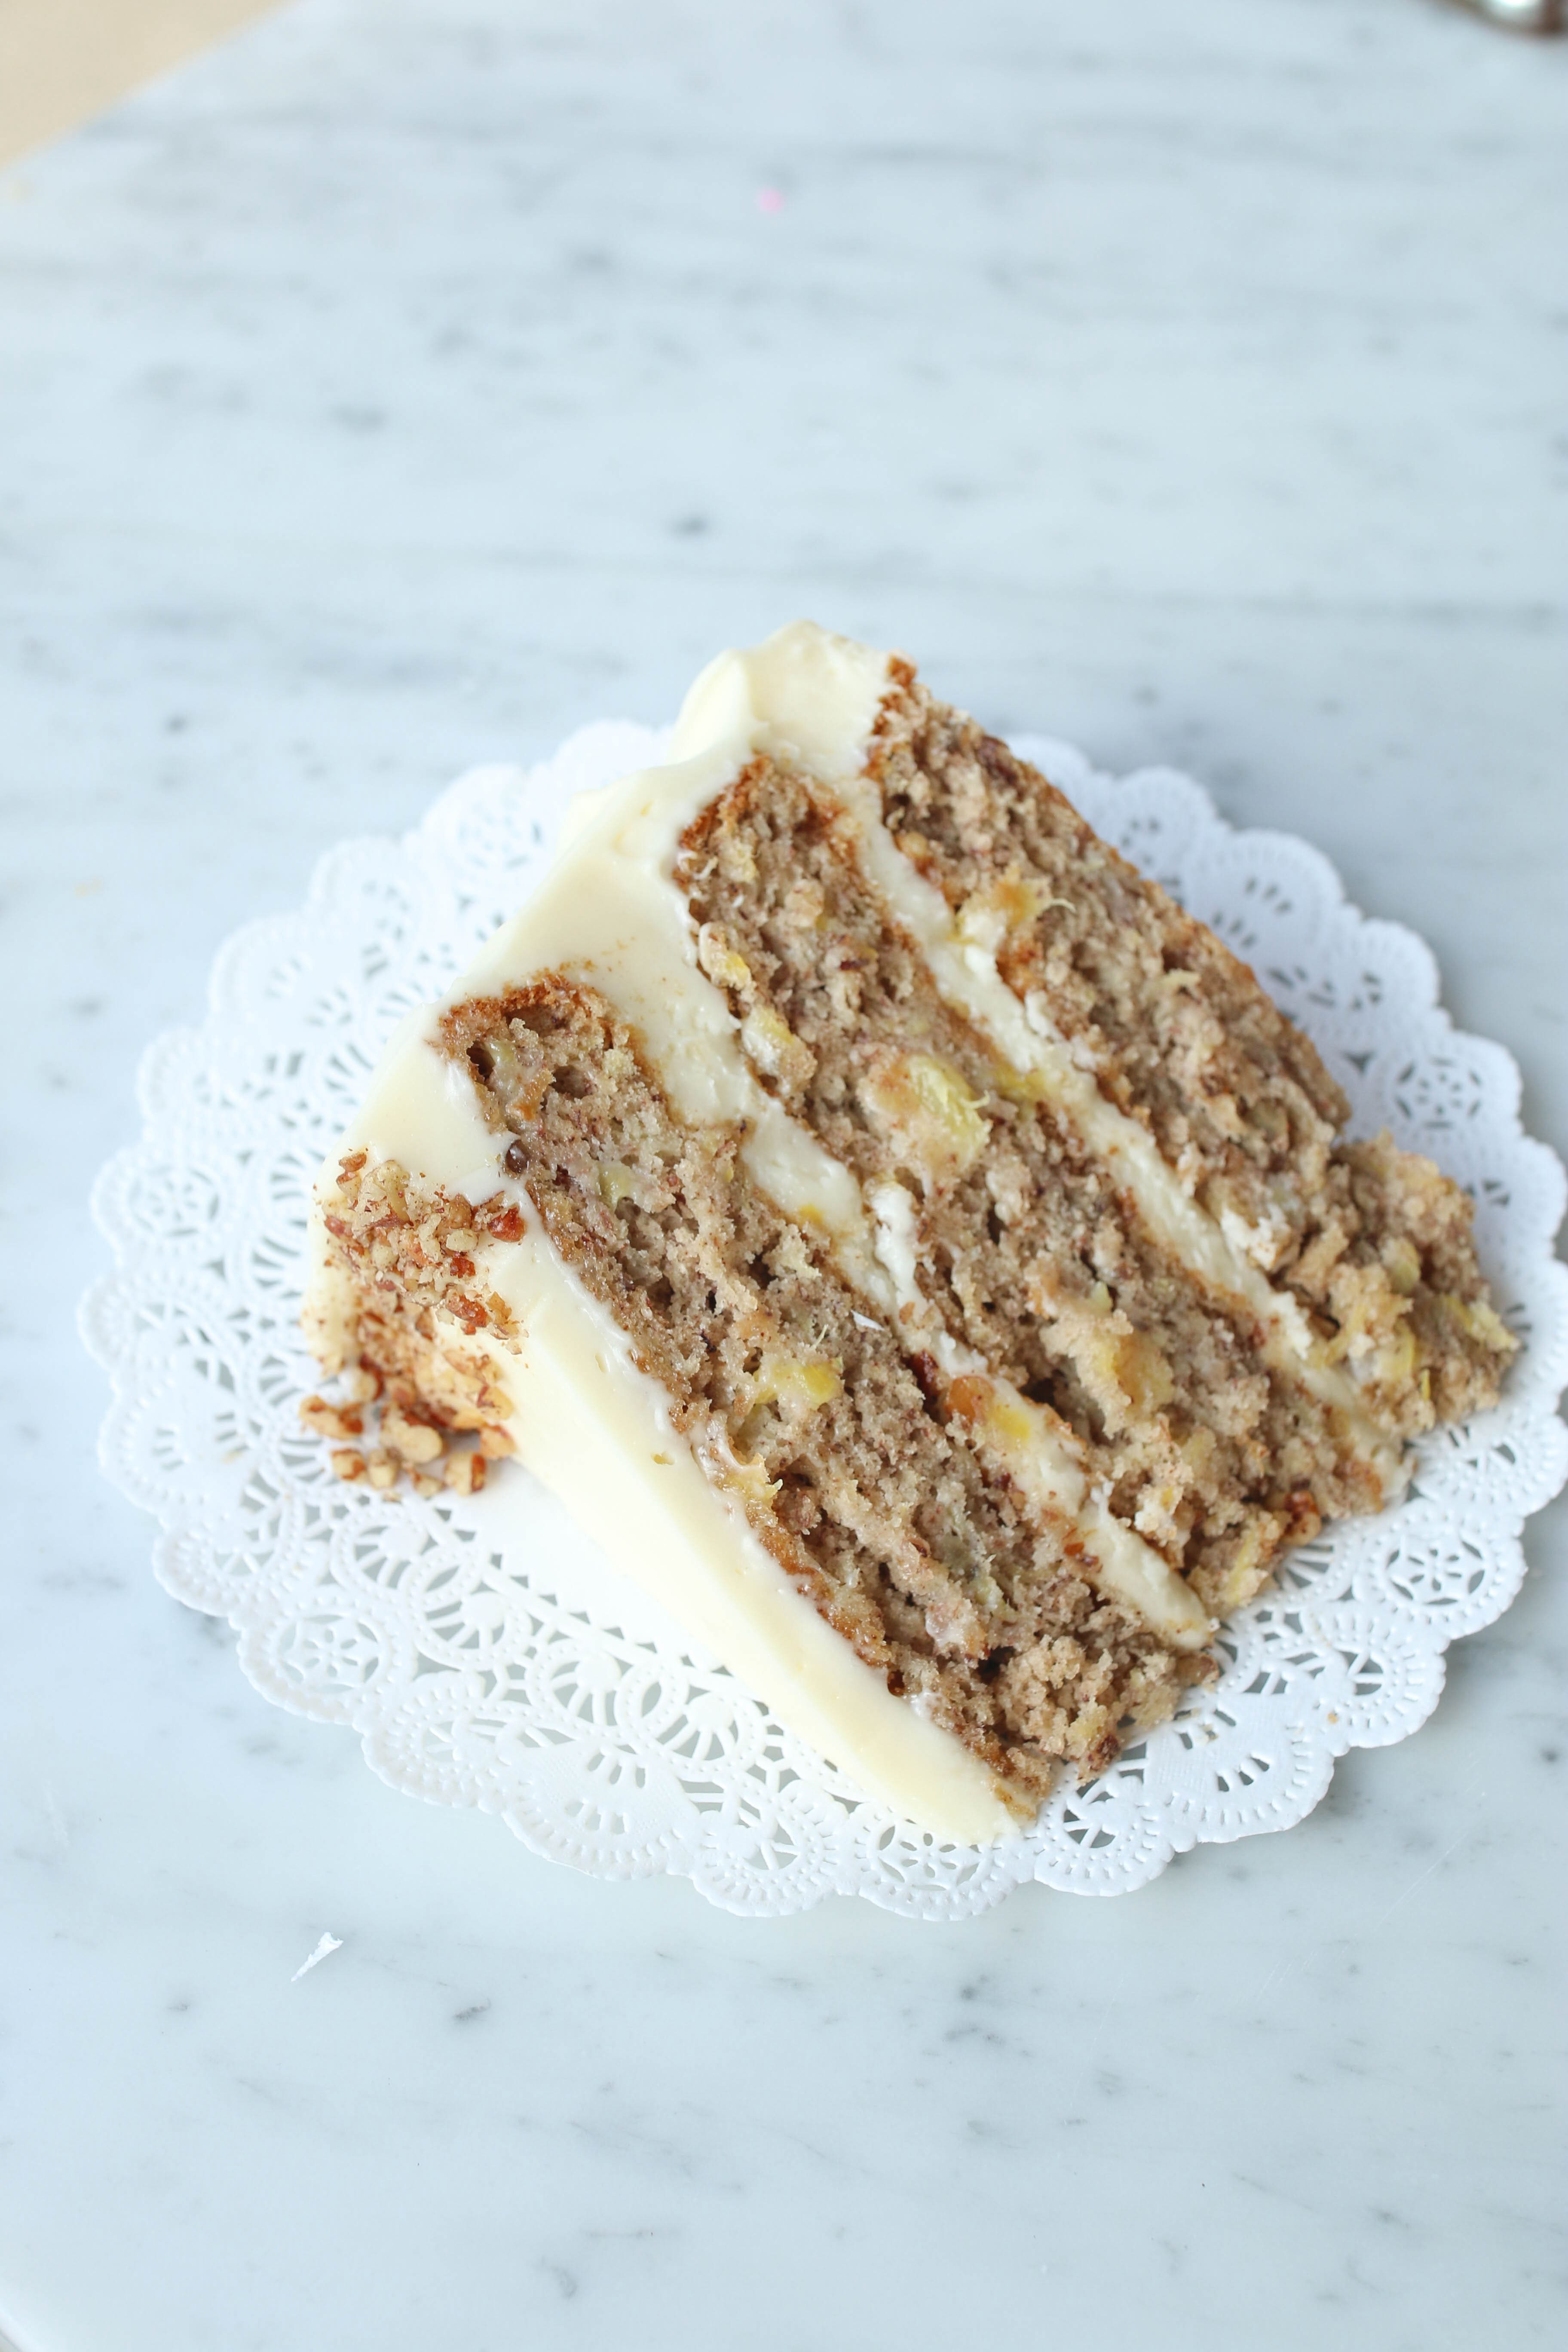 Southern Hummingbird Cake from Scratch - Out of the Box Baking